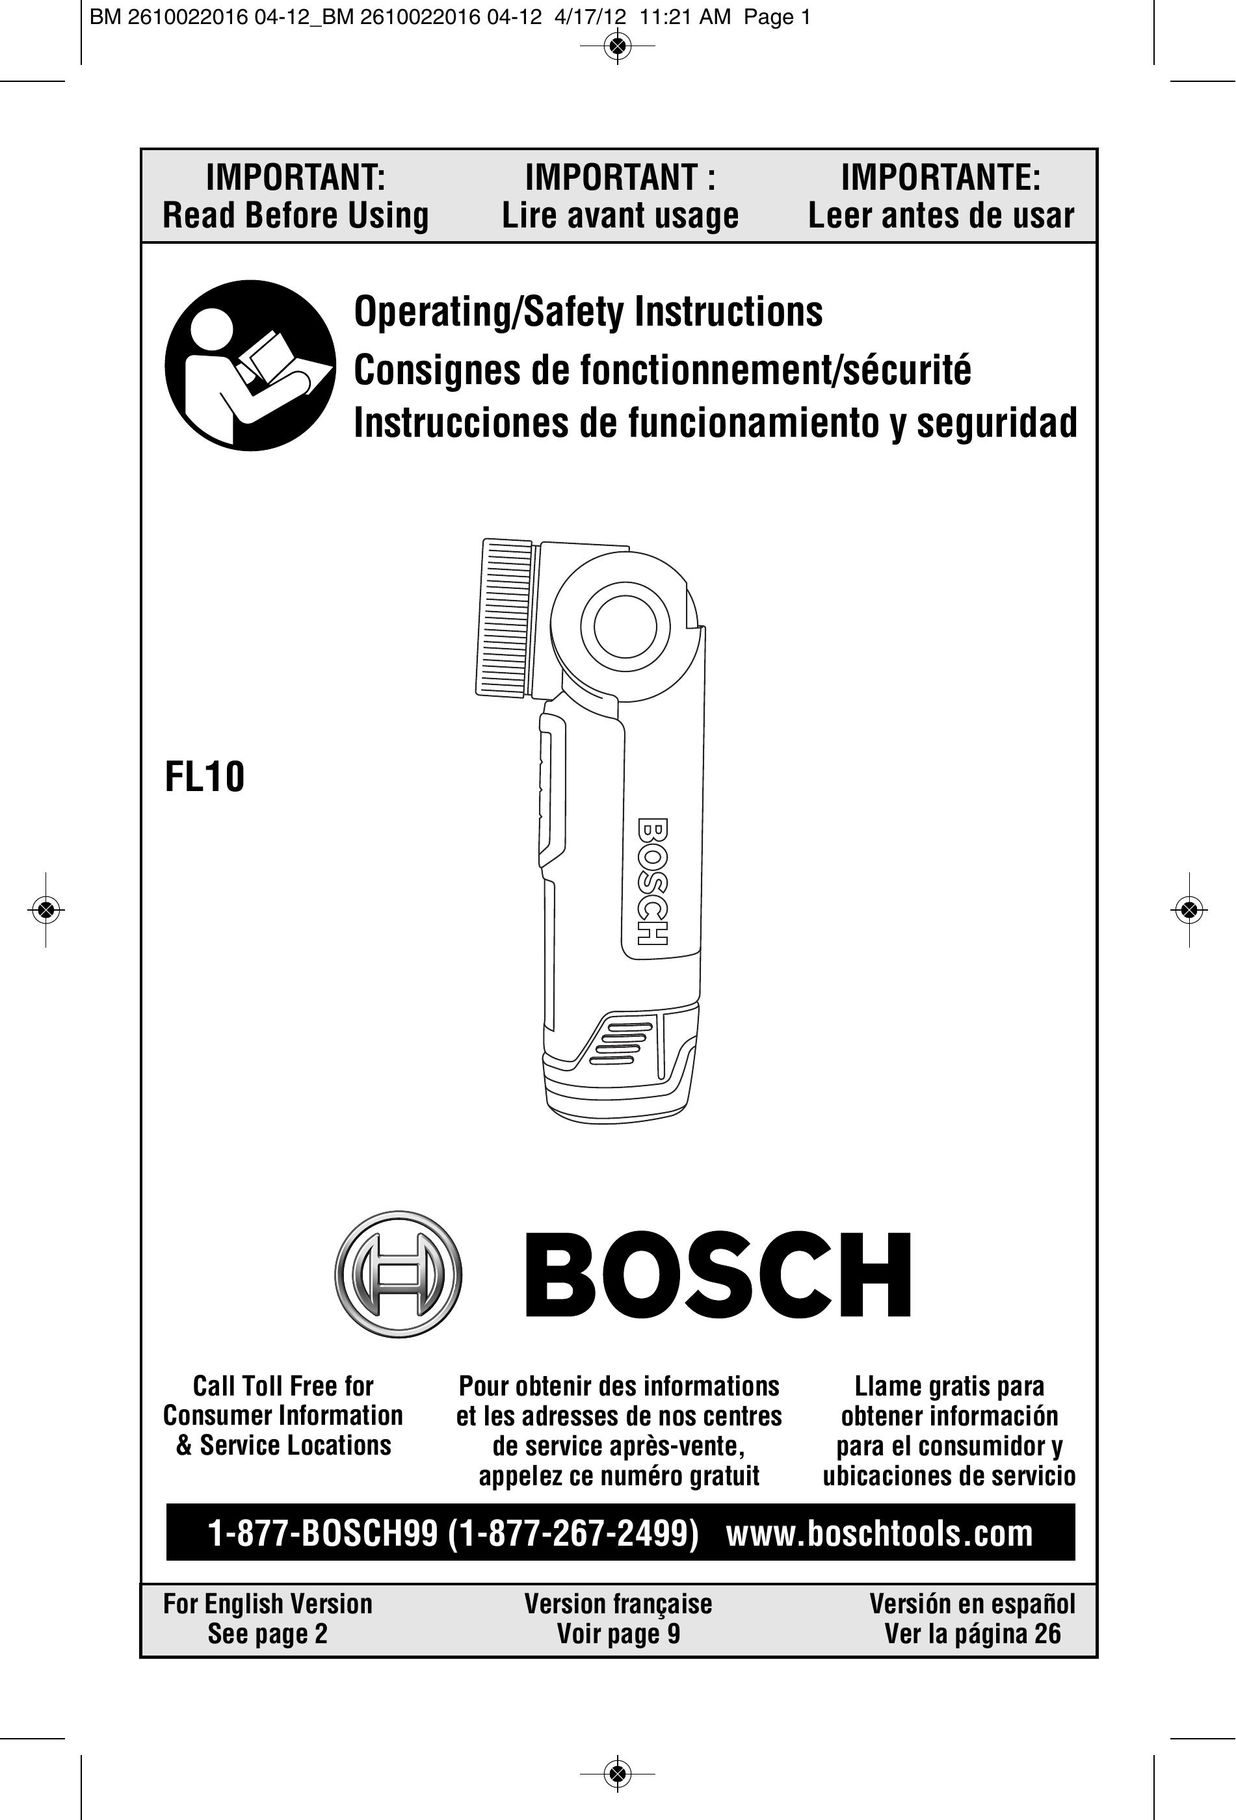 Bosch Power Tools CLPK33-120 Home Safety Product User Manual